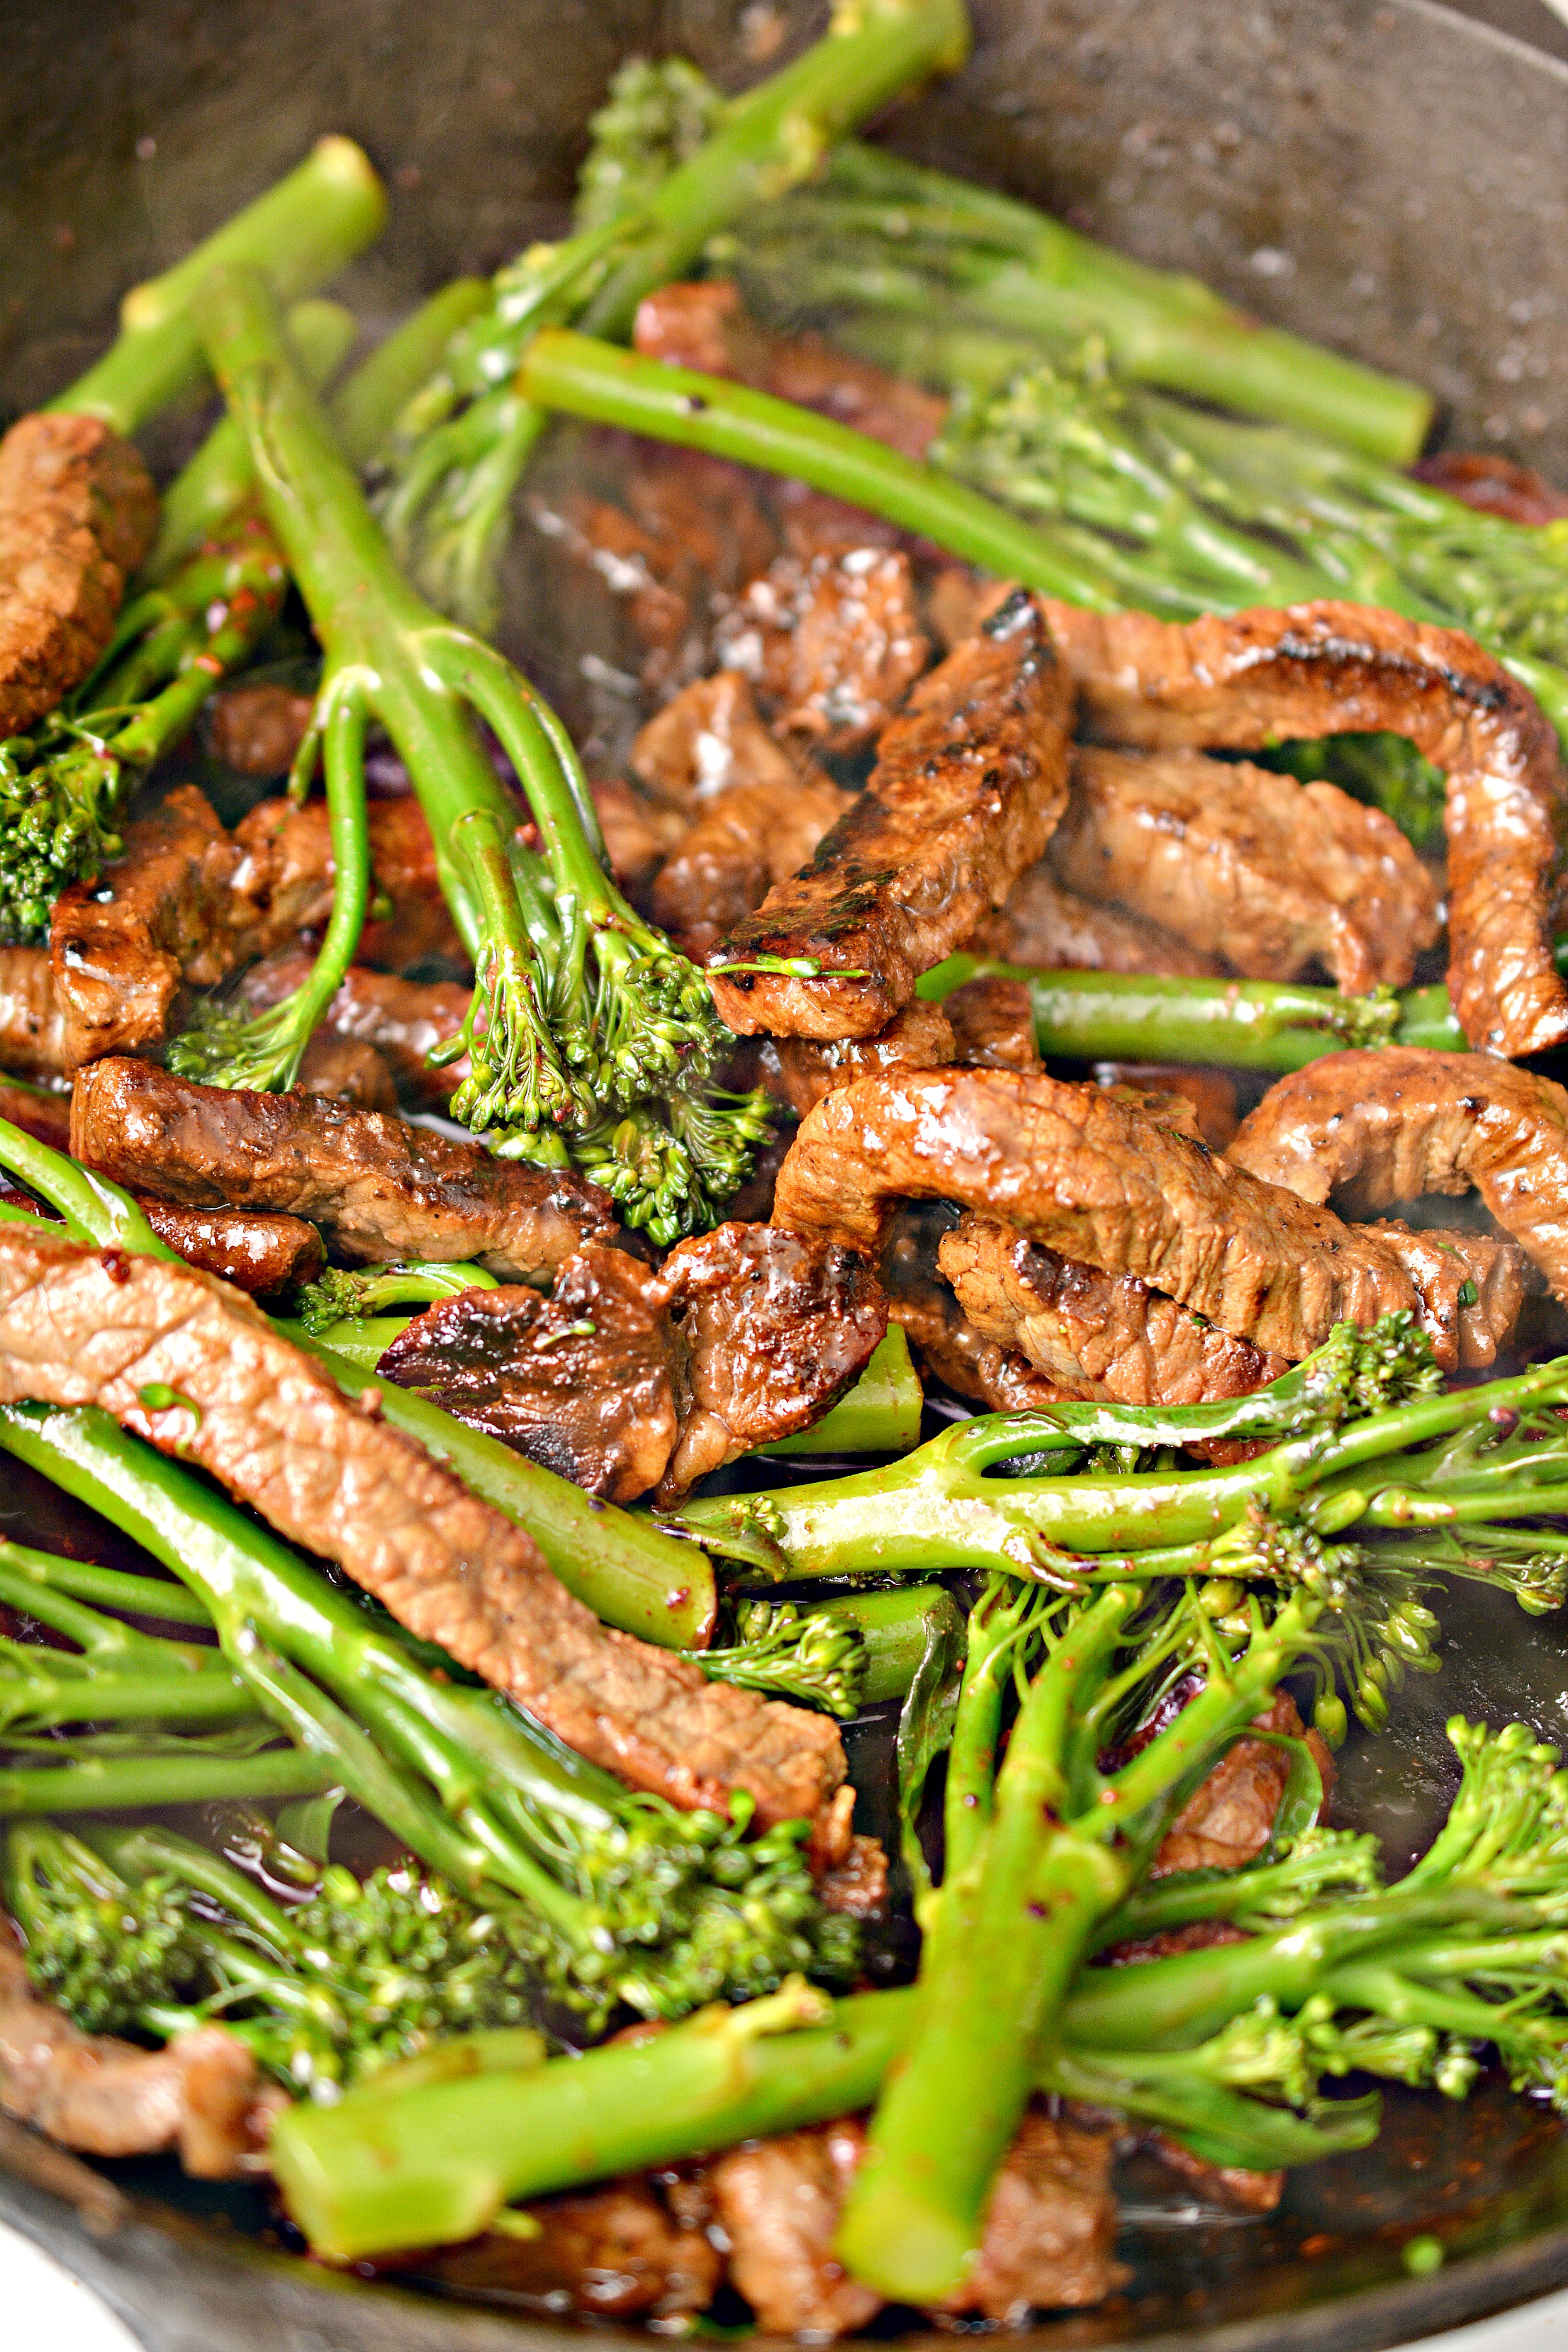 Do you love beef and broccoli? Trying to stay on a low carb keto diet? Use this recipe for Keto Beef and Broccoli to have the food you crave and still stay on the Keto lifestyle. It's a delicious and easy Asian inspired stir-fry that will keep you feeling full and on track with your diet.